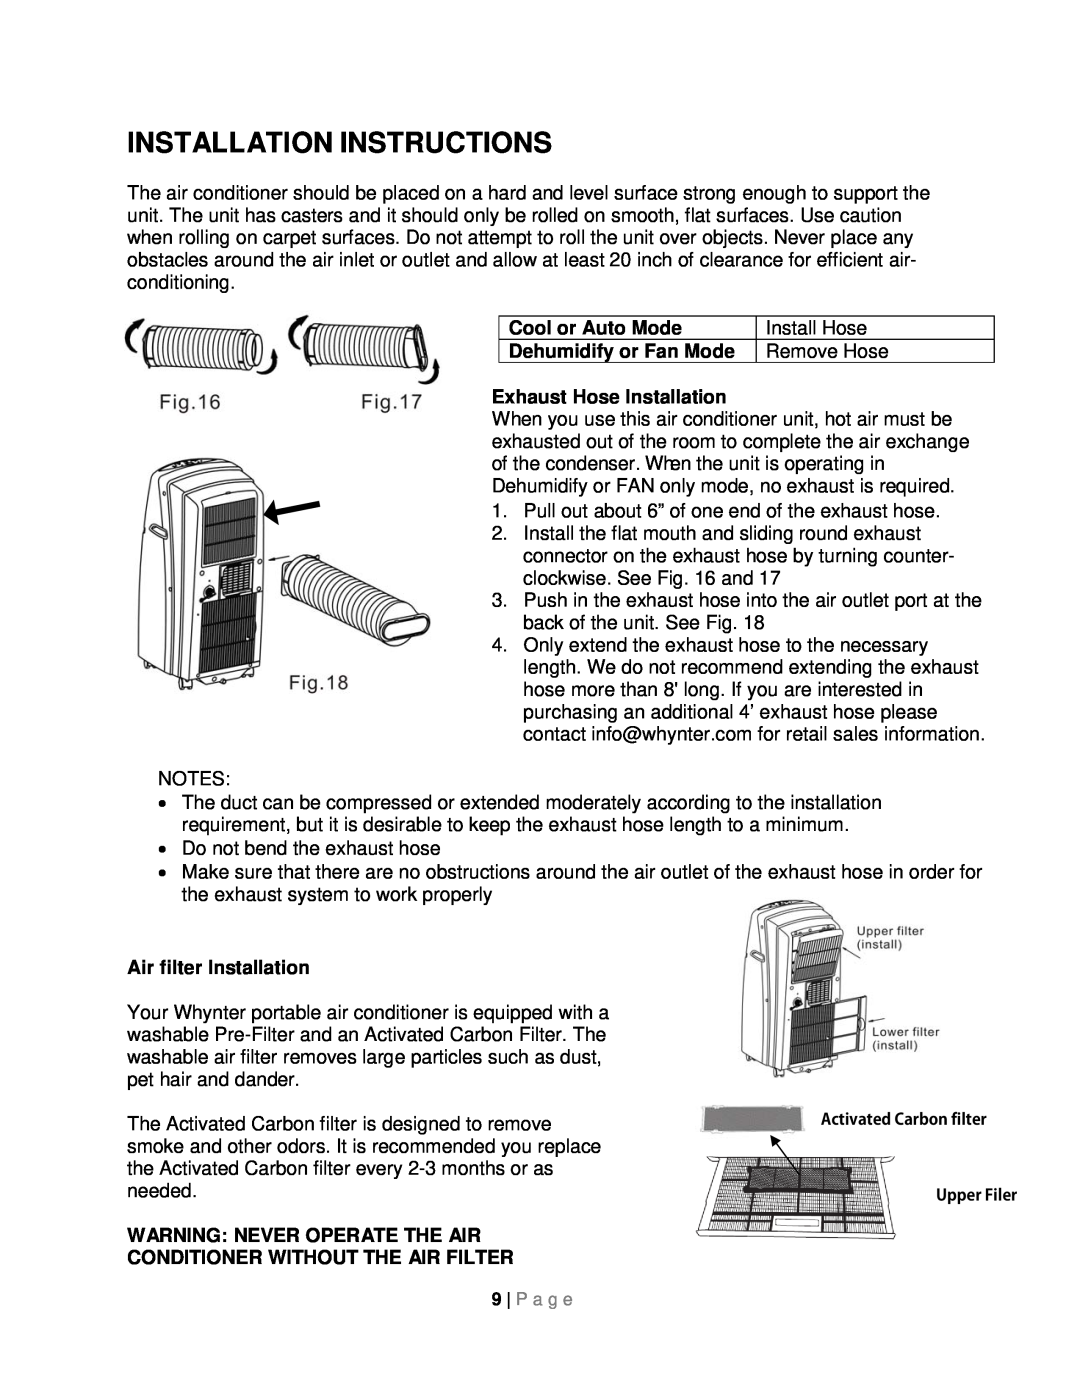 Whynter ARC-08WB Installation Instructions, Cool or Auto Mode Dehumidify or Fan Mode, Exhaust Hose Installation 